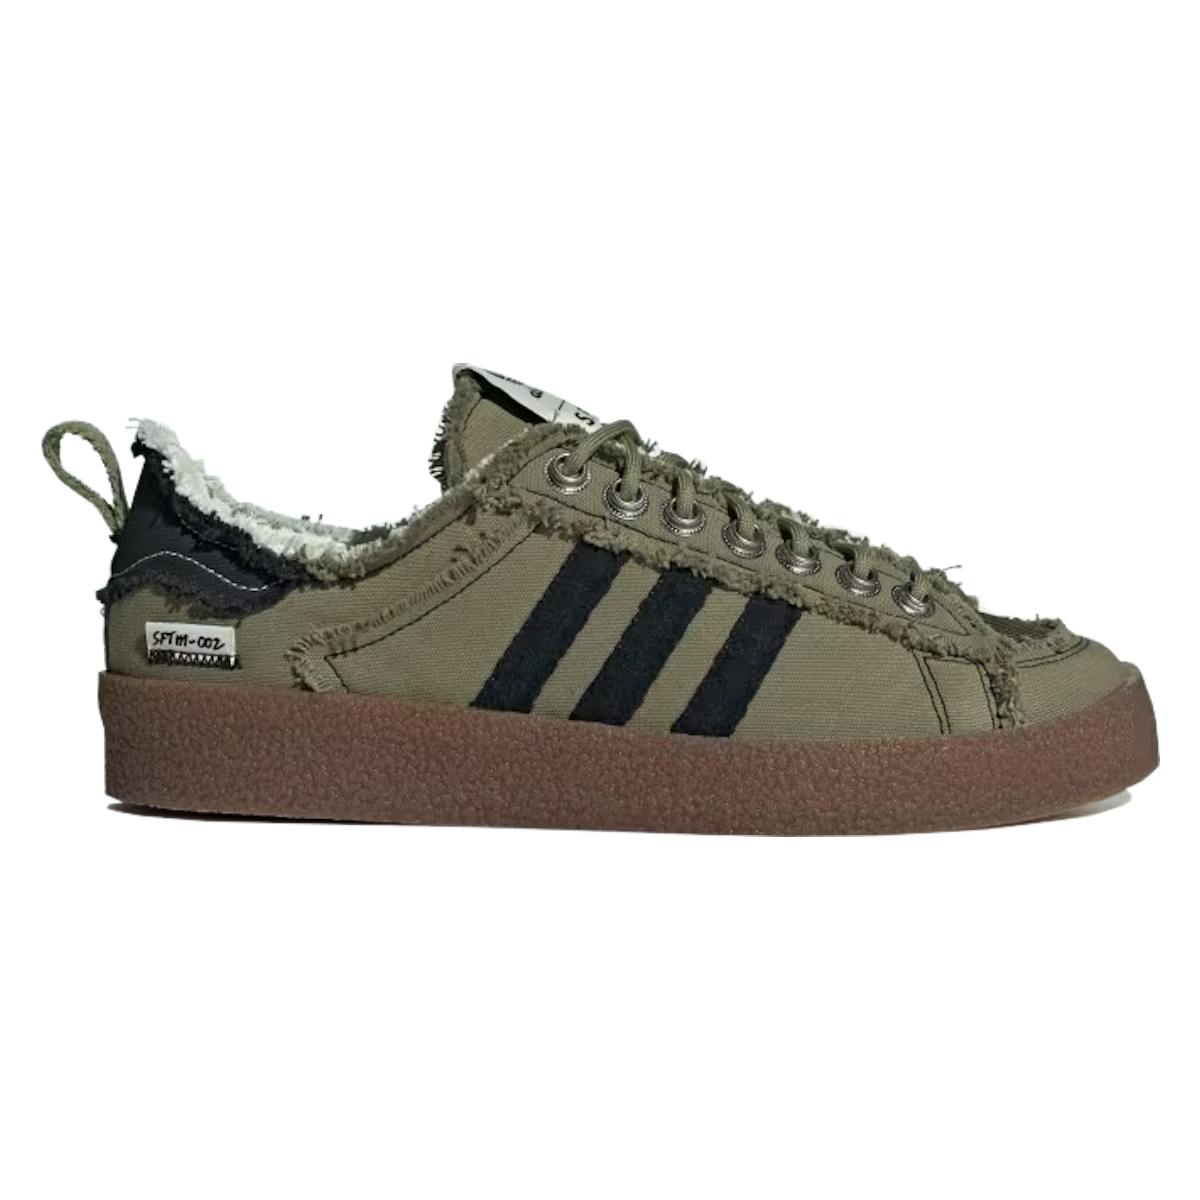 Song for the mute x Adidas Campus 80s "Focus Olive"